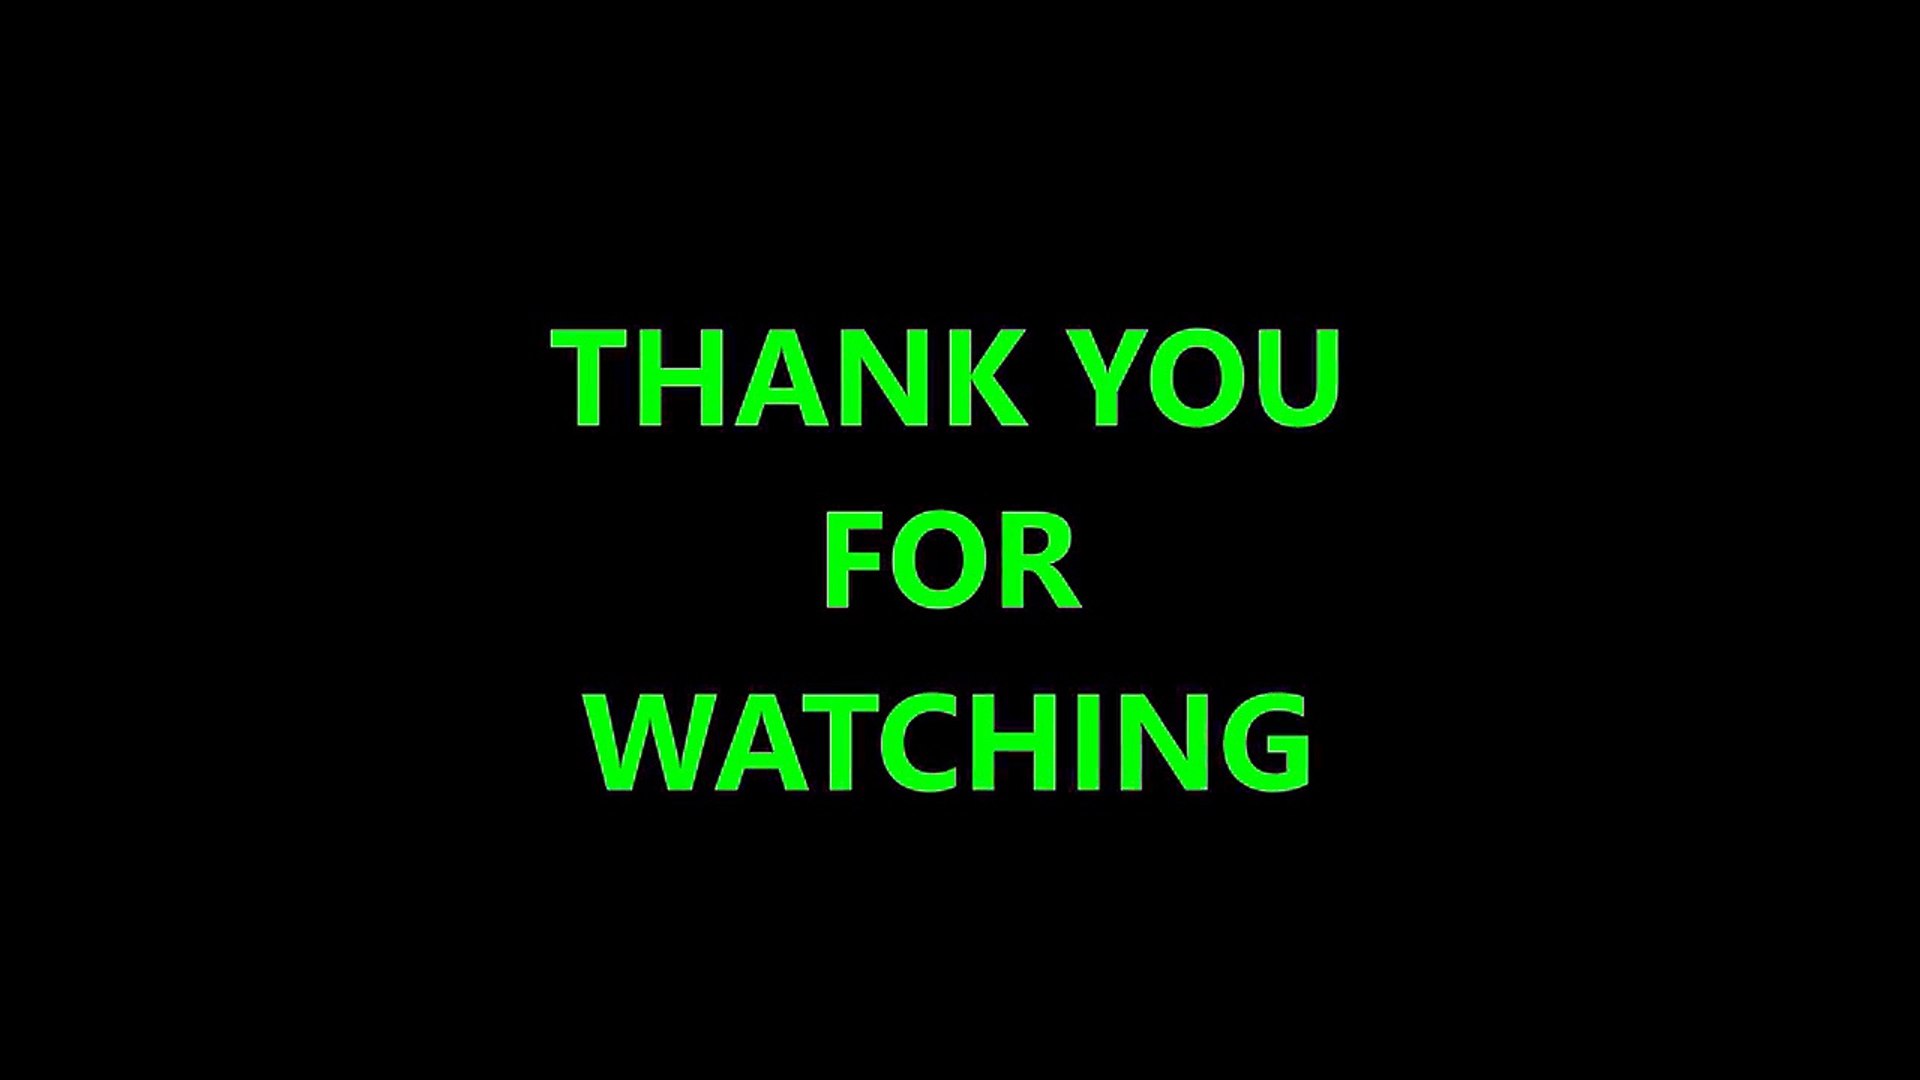 Thank You for watching